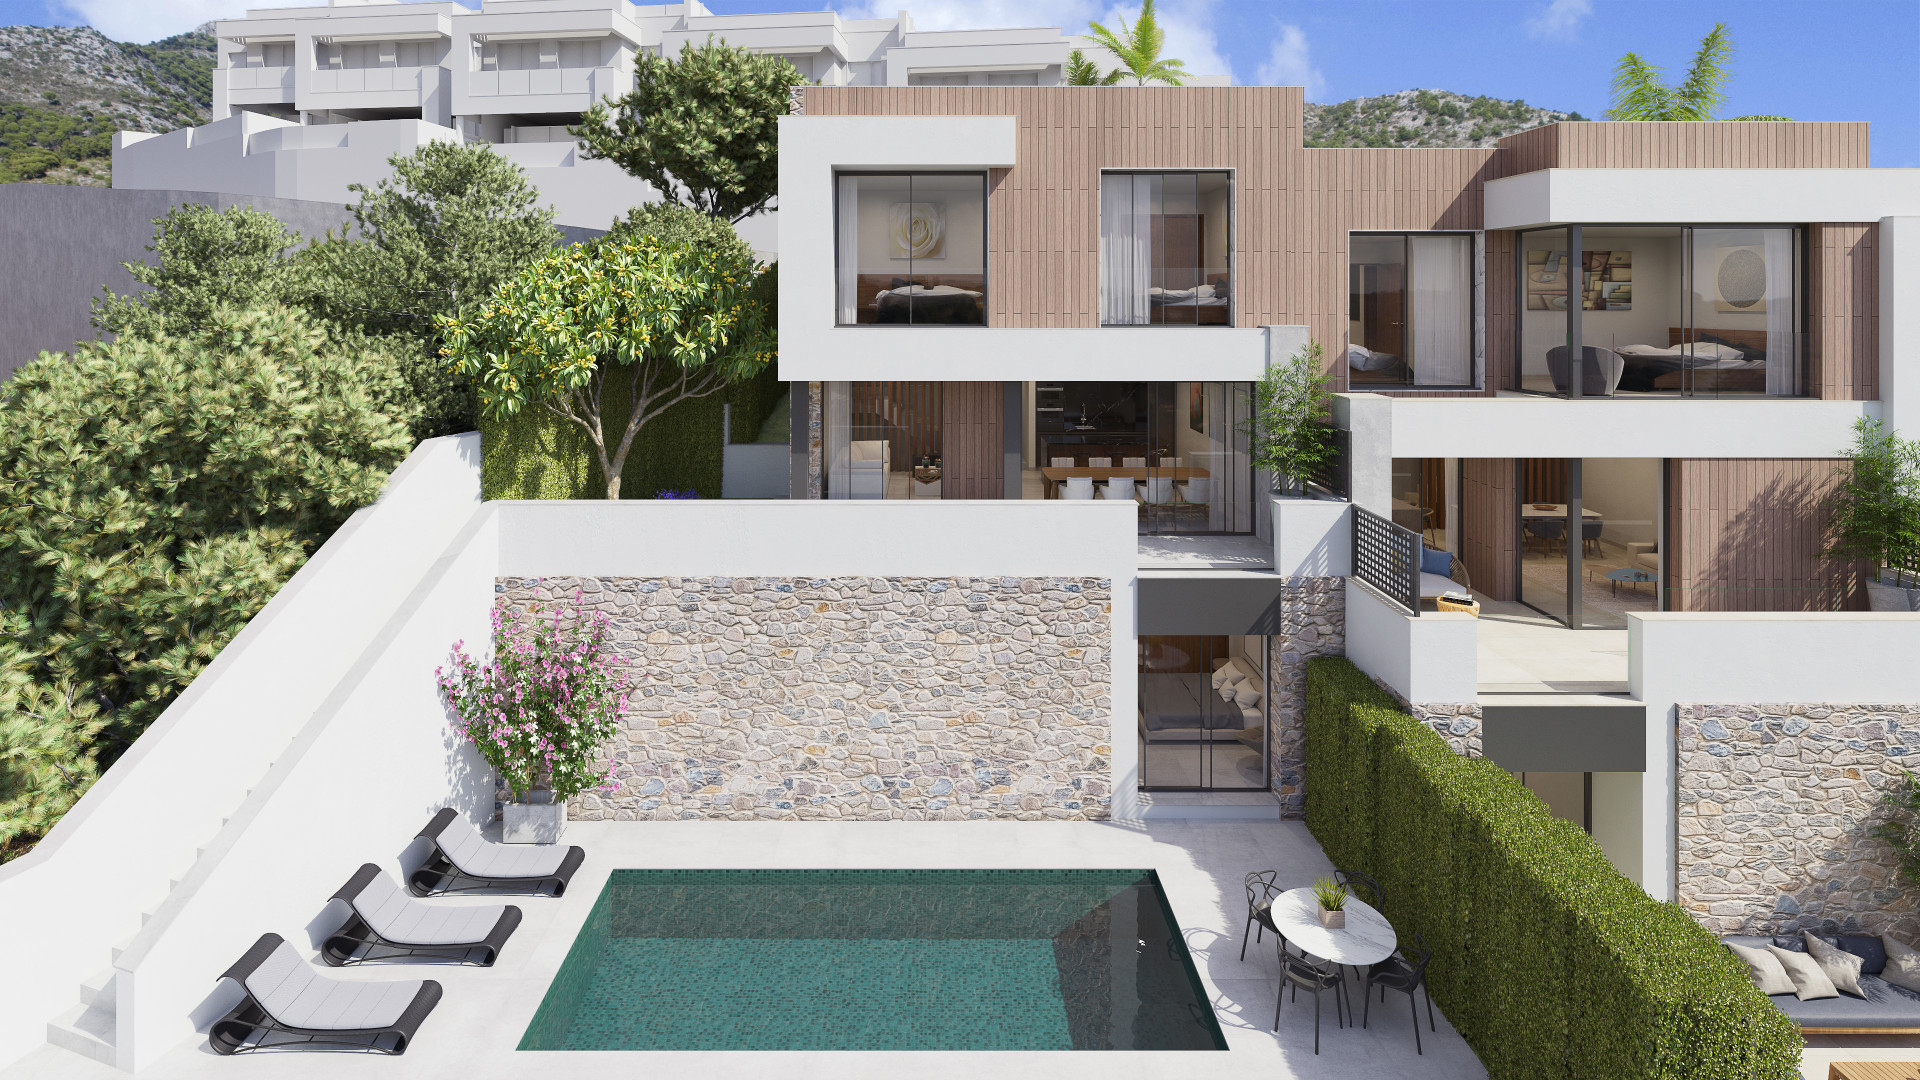 Brand new four bedroom townhouse with sea views located in Mijas Costa.